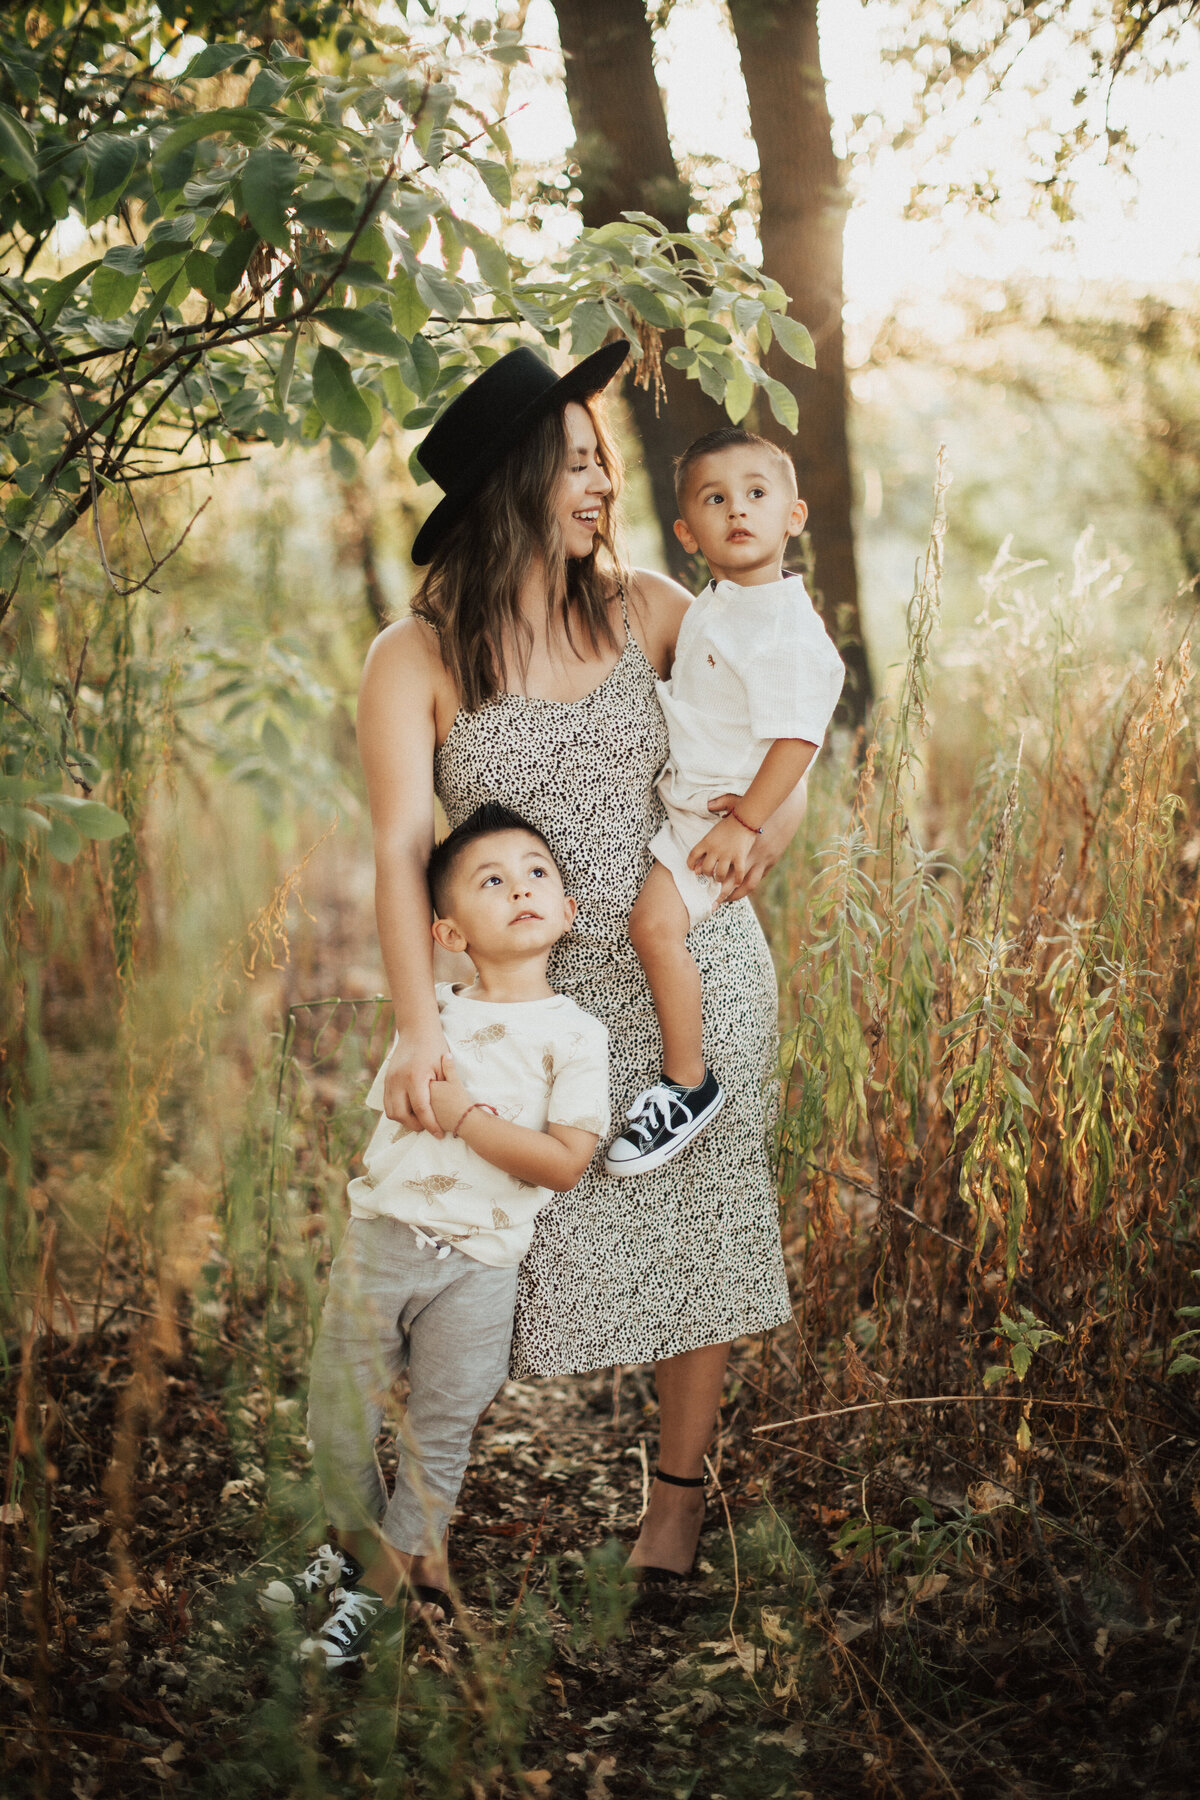 FAMILY-HB1A1446-Edit